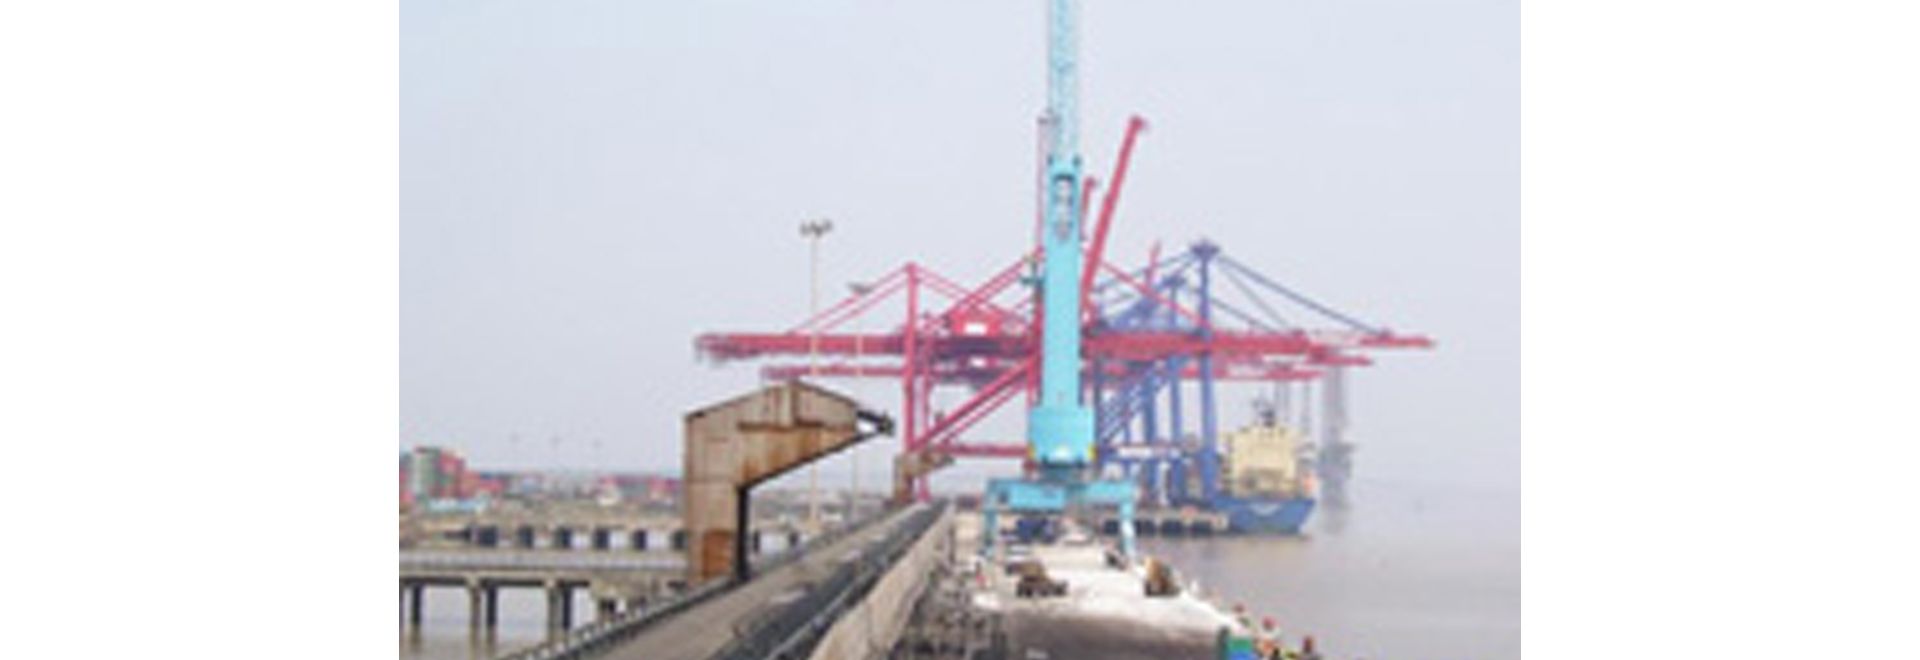 Expansion of Container Terminal – IDBI Bank Limited/Gujarat Pipavav Port Limited